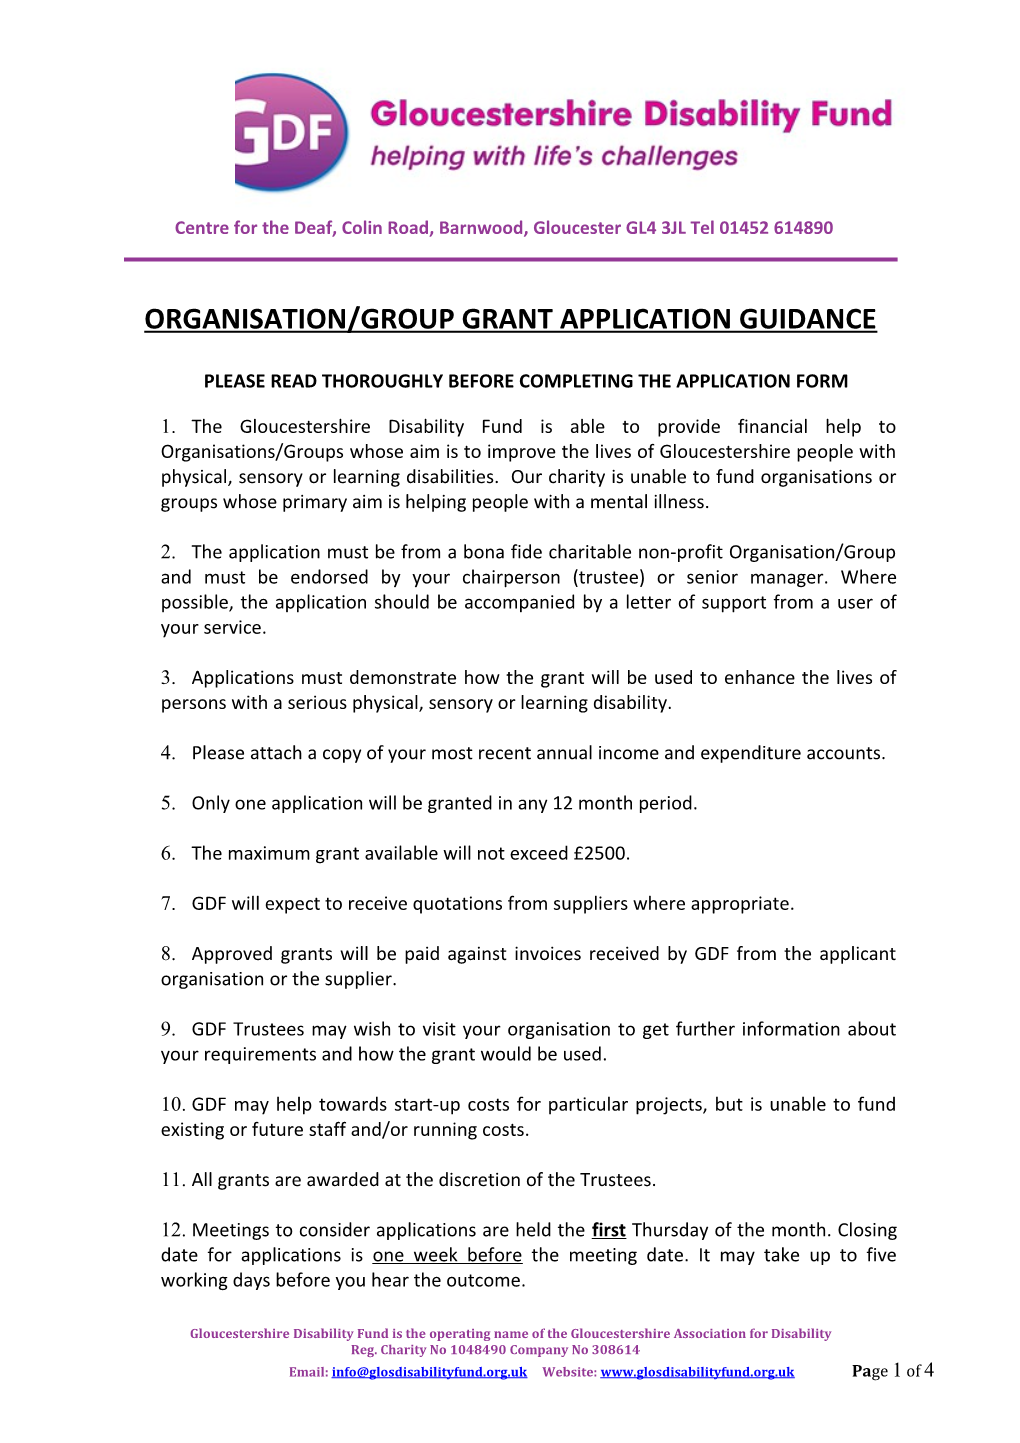 Organisation/Group Grant Application Guidance